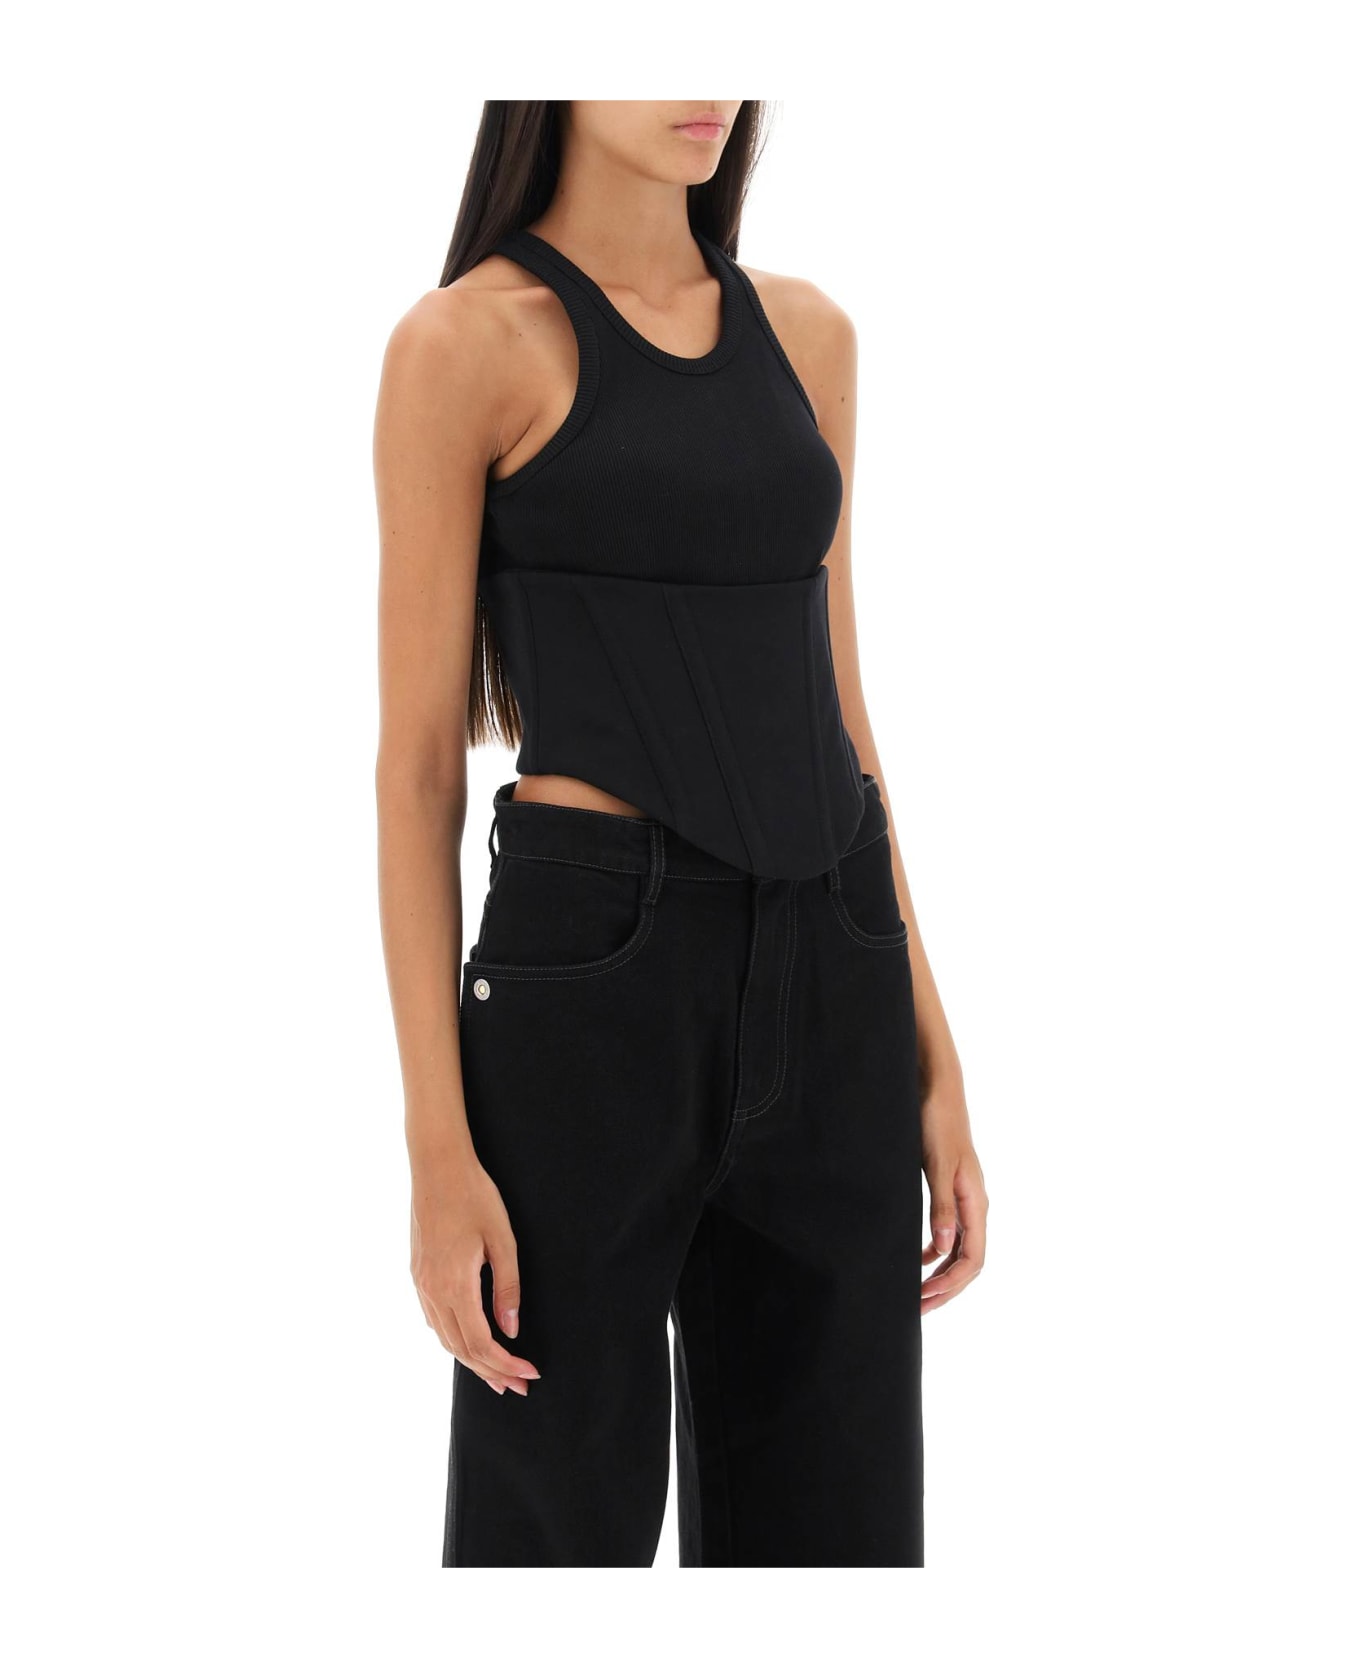 Dion Lee Tank Top With Underbust Corset - BLACK タンクトップ